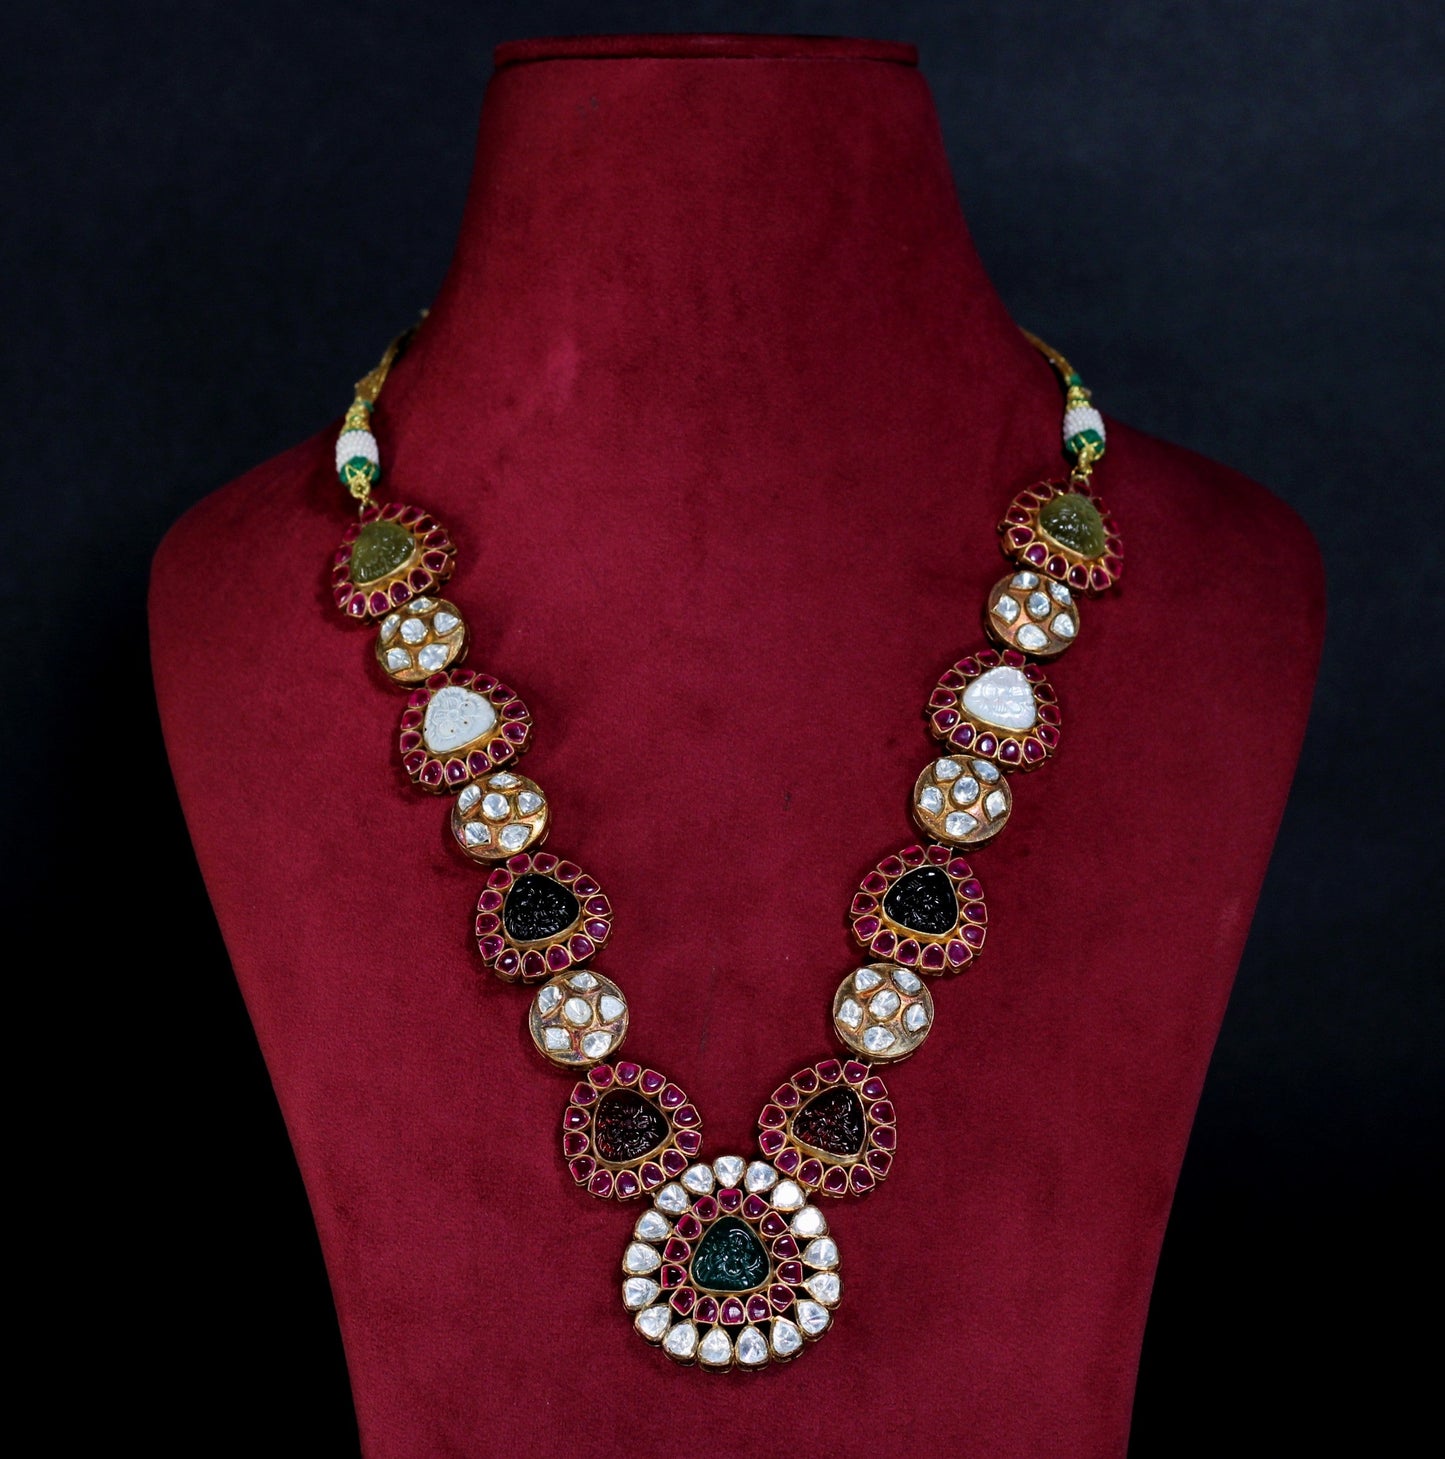 NECKLACE AND EARRING IN 92.5 STERLING SILVER IN 18KT GOLD PLATED WITH POLKI, GREEN & PINK ONYX , fluorite &  RHODOLITE